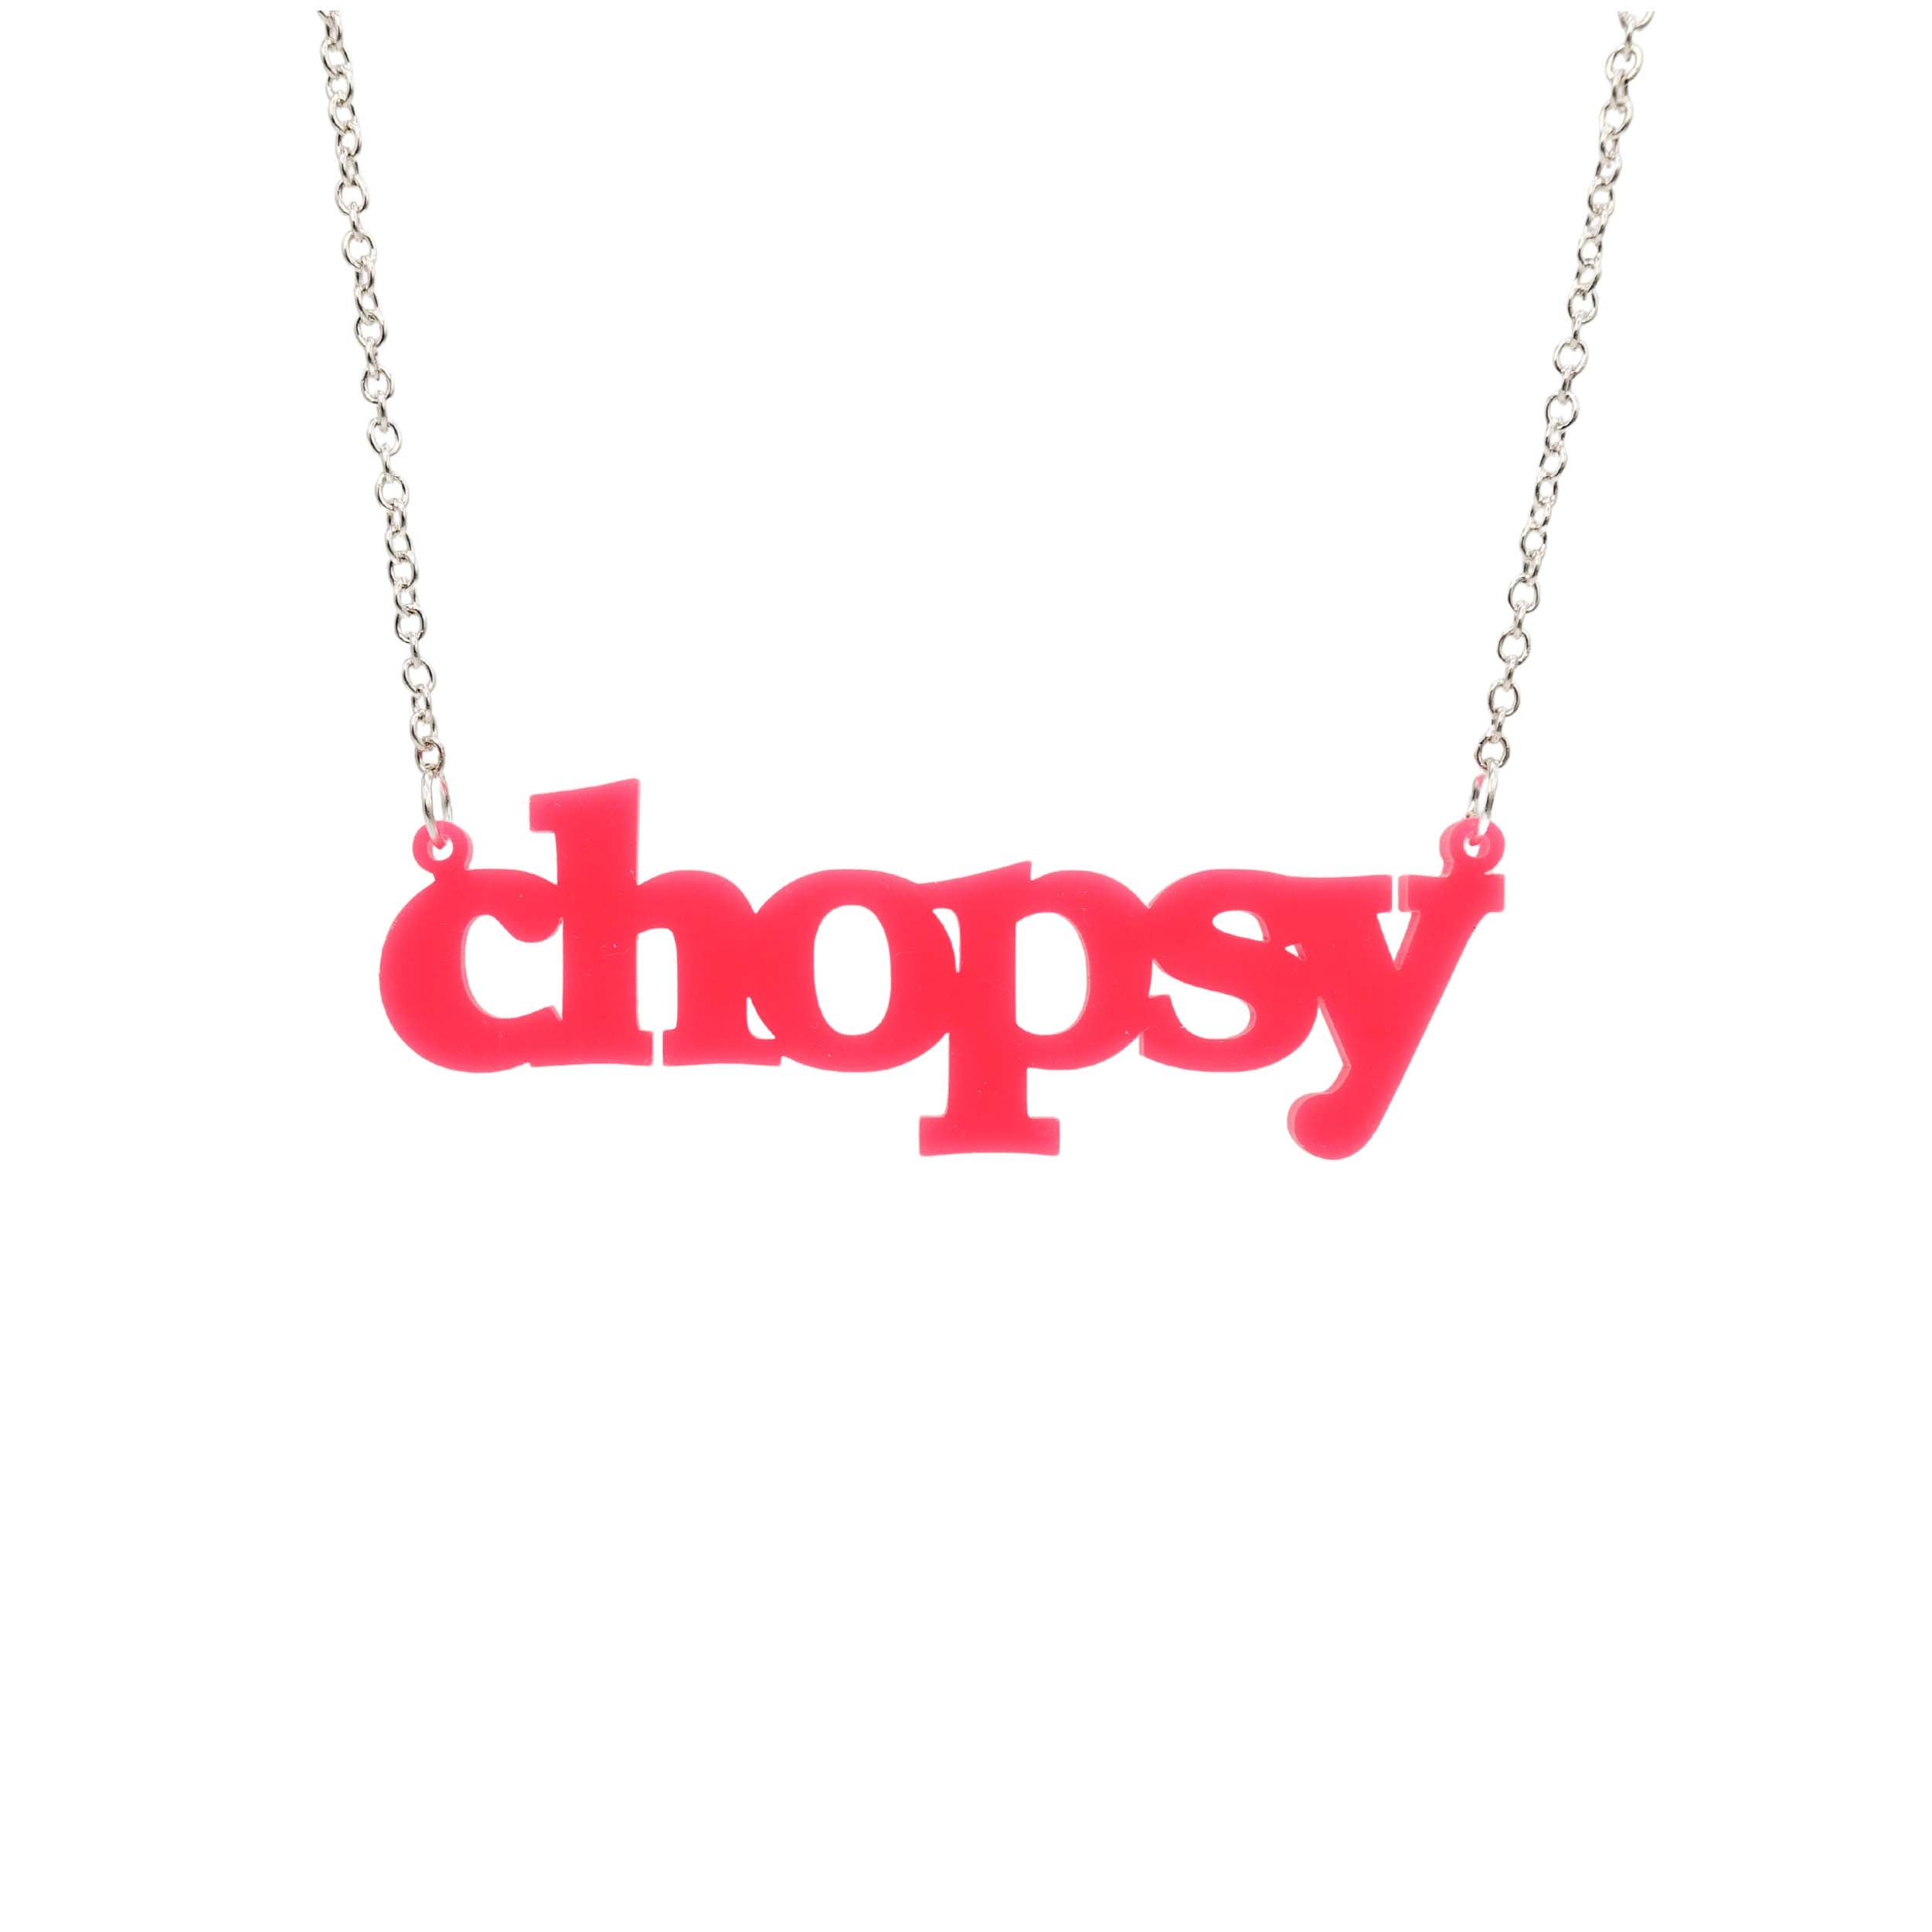 Hot pink Chopsy necklace shown hanging against a white background. 